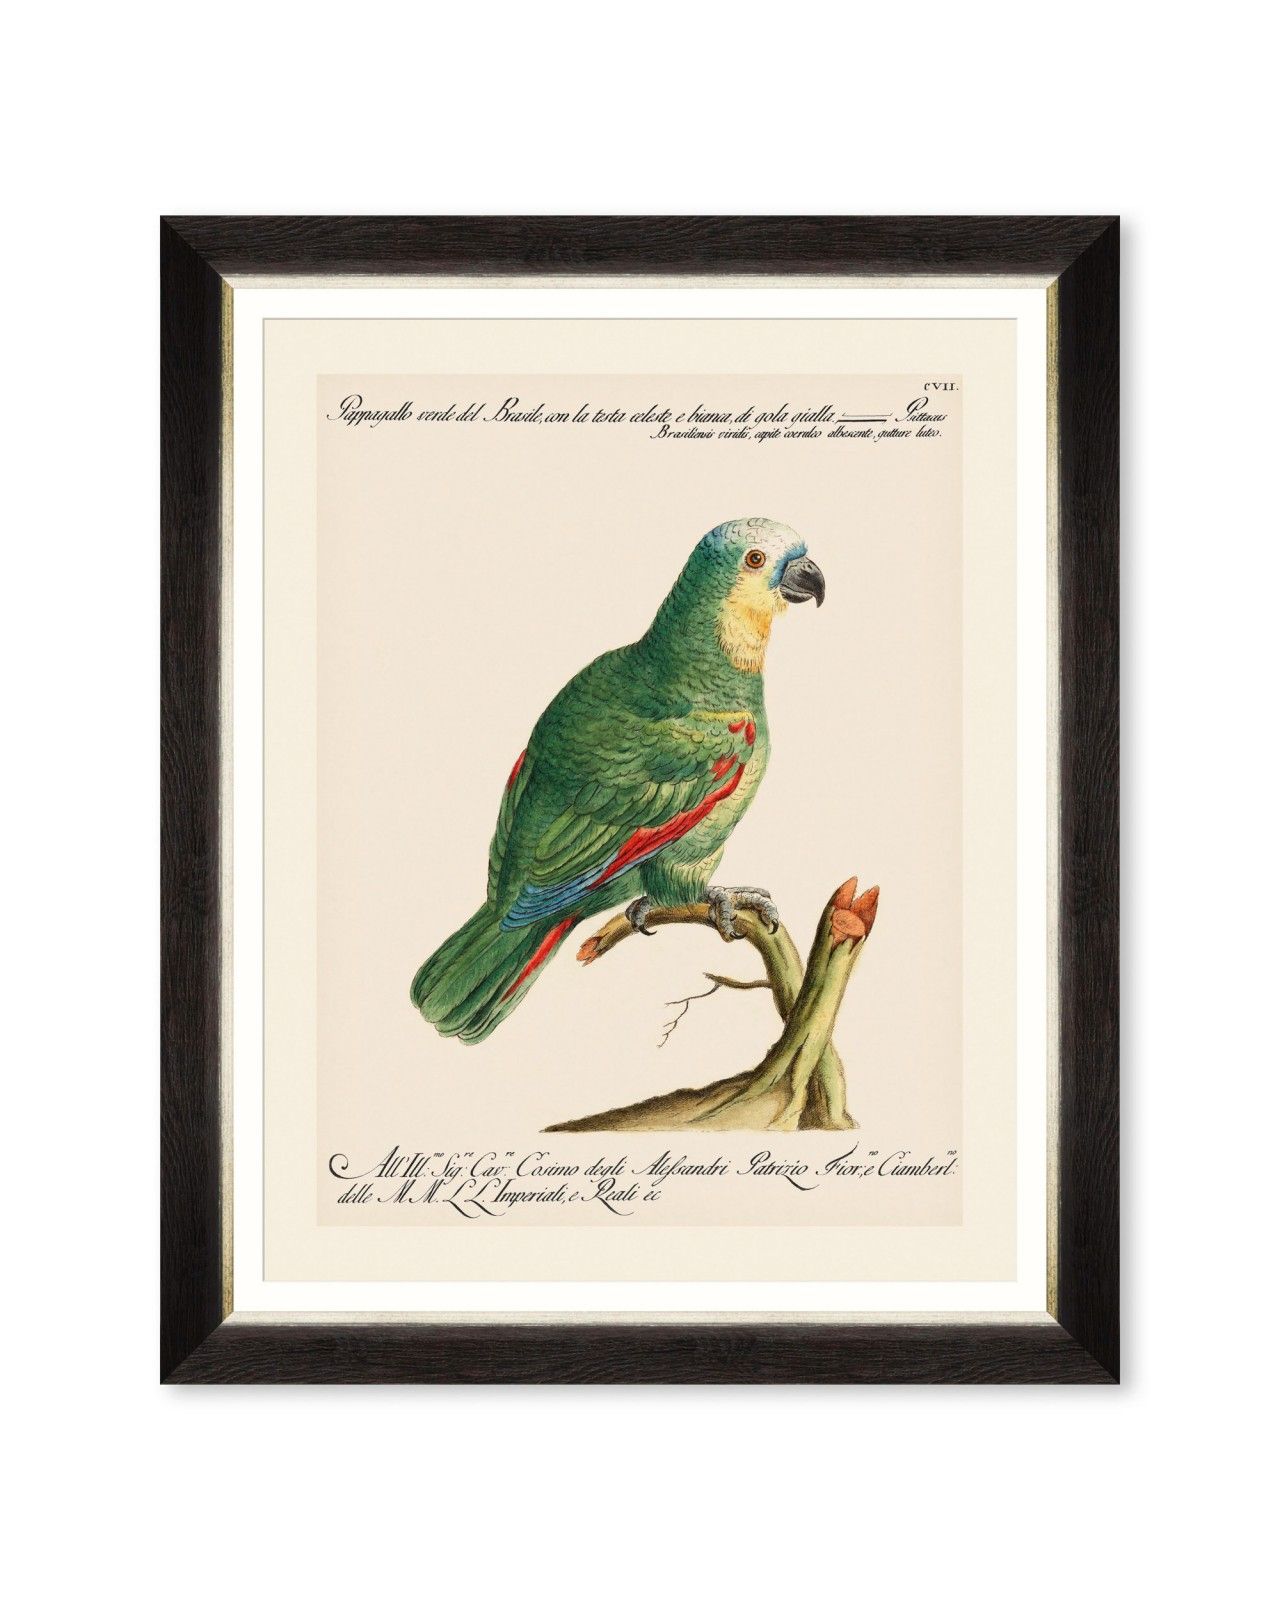 Parrots Of Brazil I Framed Art – Wall Art – Sale – Products With Regard To Most Recent Bird Macaw Wall Sculpture (Gallery 16 of 20)